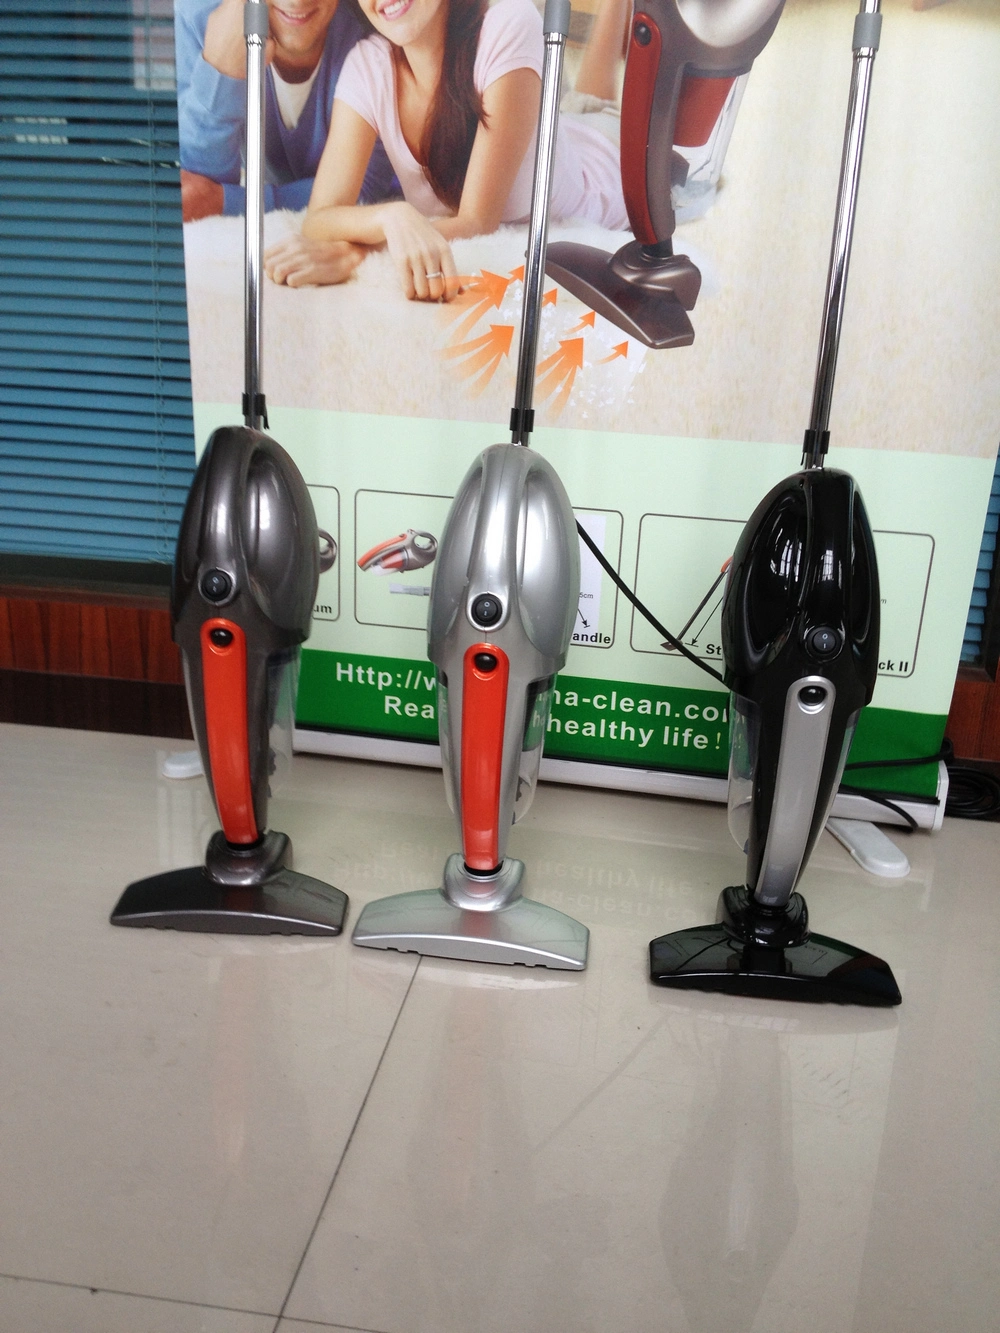 4 in 1 Stick & Handle & Vacuum & Blower Vacuum Cleaner for Home Use